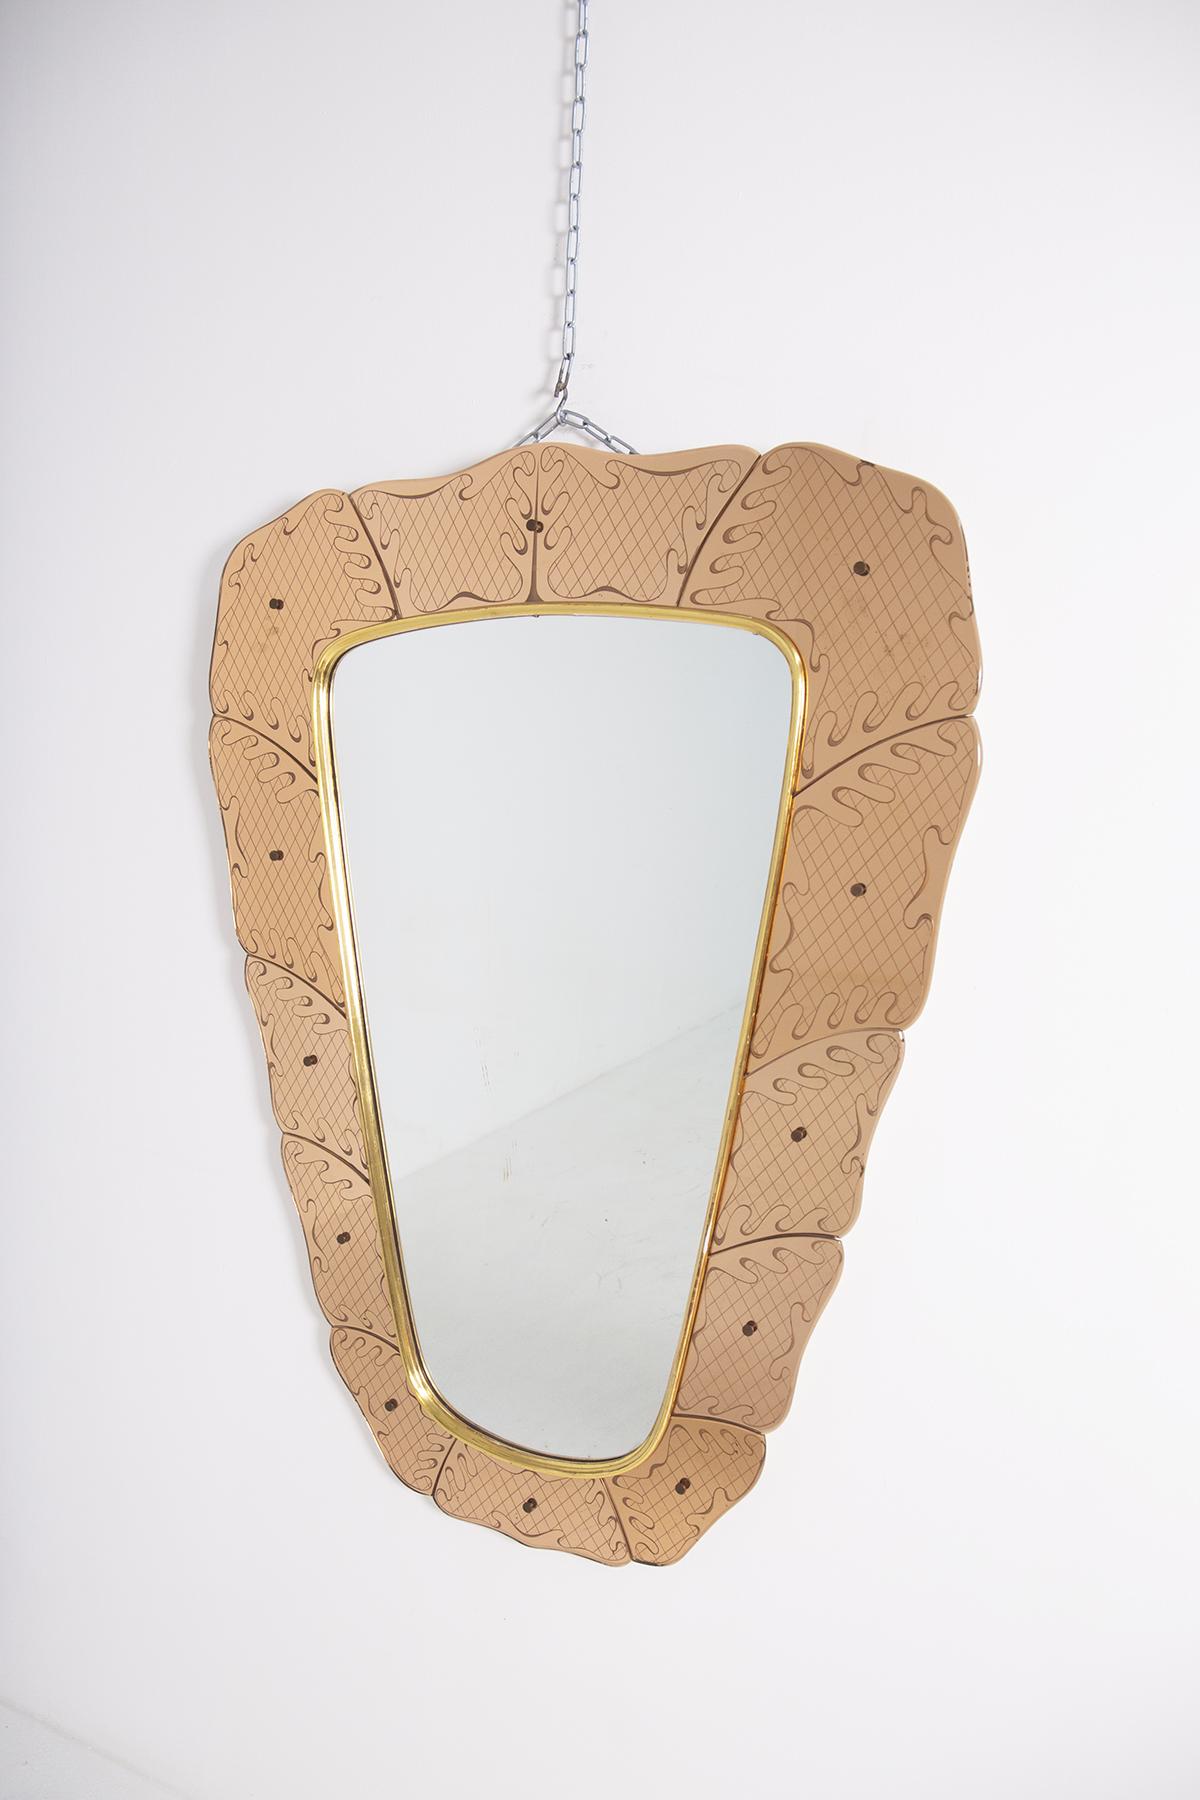 Elegant and refined mid-century Italian mirror from the 1940s.
The mirror has been attributed to Luigi Fontana because of his workmanship and achievements.
The mirror features many iconographic elements.
Its frame made of pink artistic glass